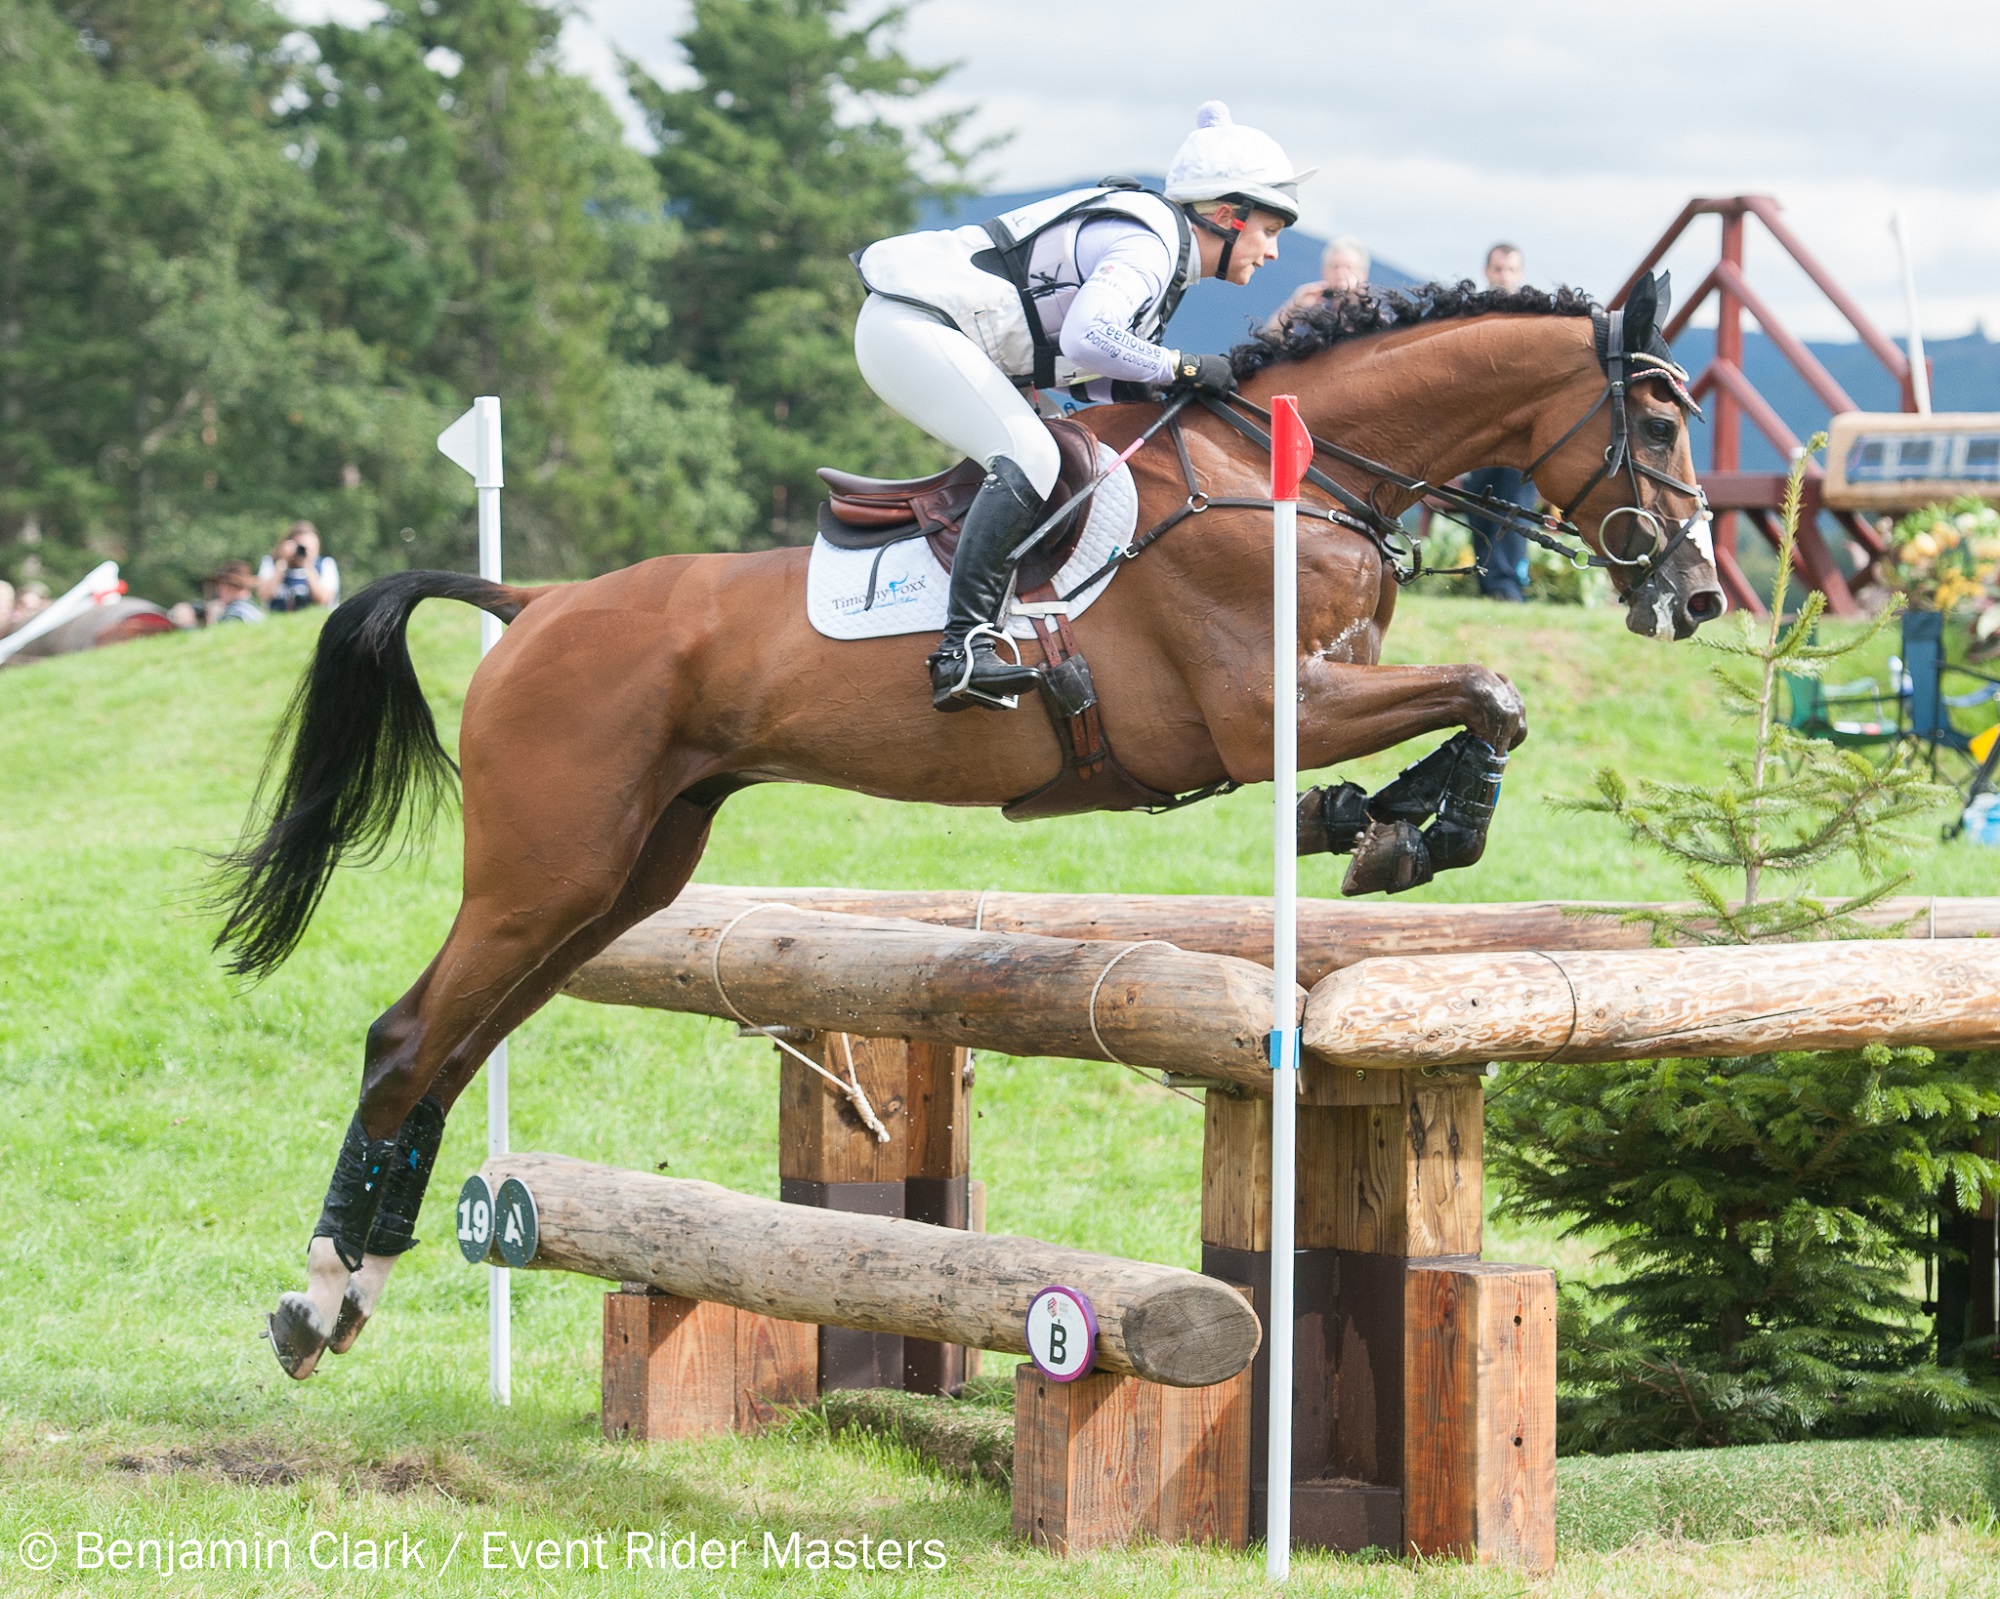 Gemma Tattersall takes 2017 Event Rider Masters title